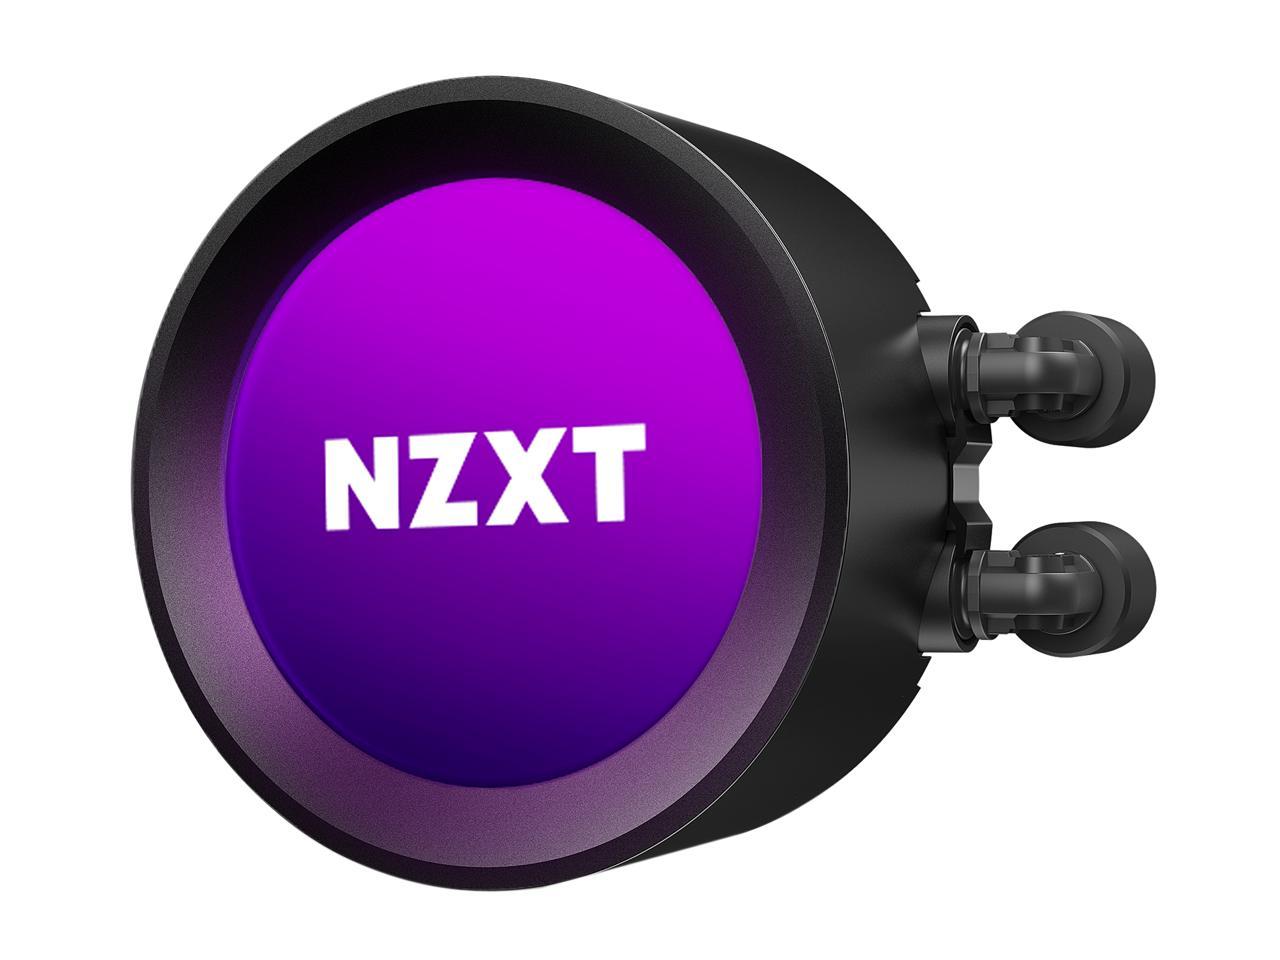 NZXT Kraken Z Series Z73 360mm - RL-KRZ73-01 - AIO RGB CPU Liquid Cooler - Customizable LCD Display - Improved Pump - Powered by CAM V4 - RGB Connector - Aer P 120mm Radiator Fans (3 Included)